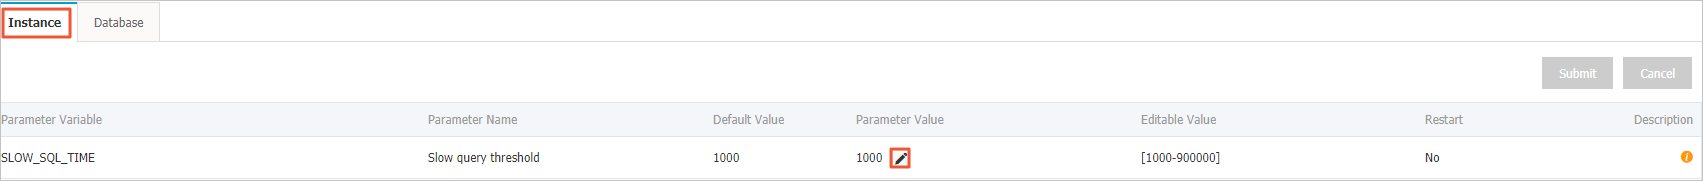 Modify the value of instance parameter 1